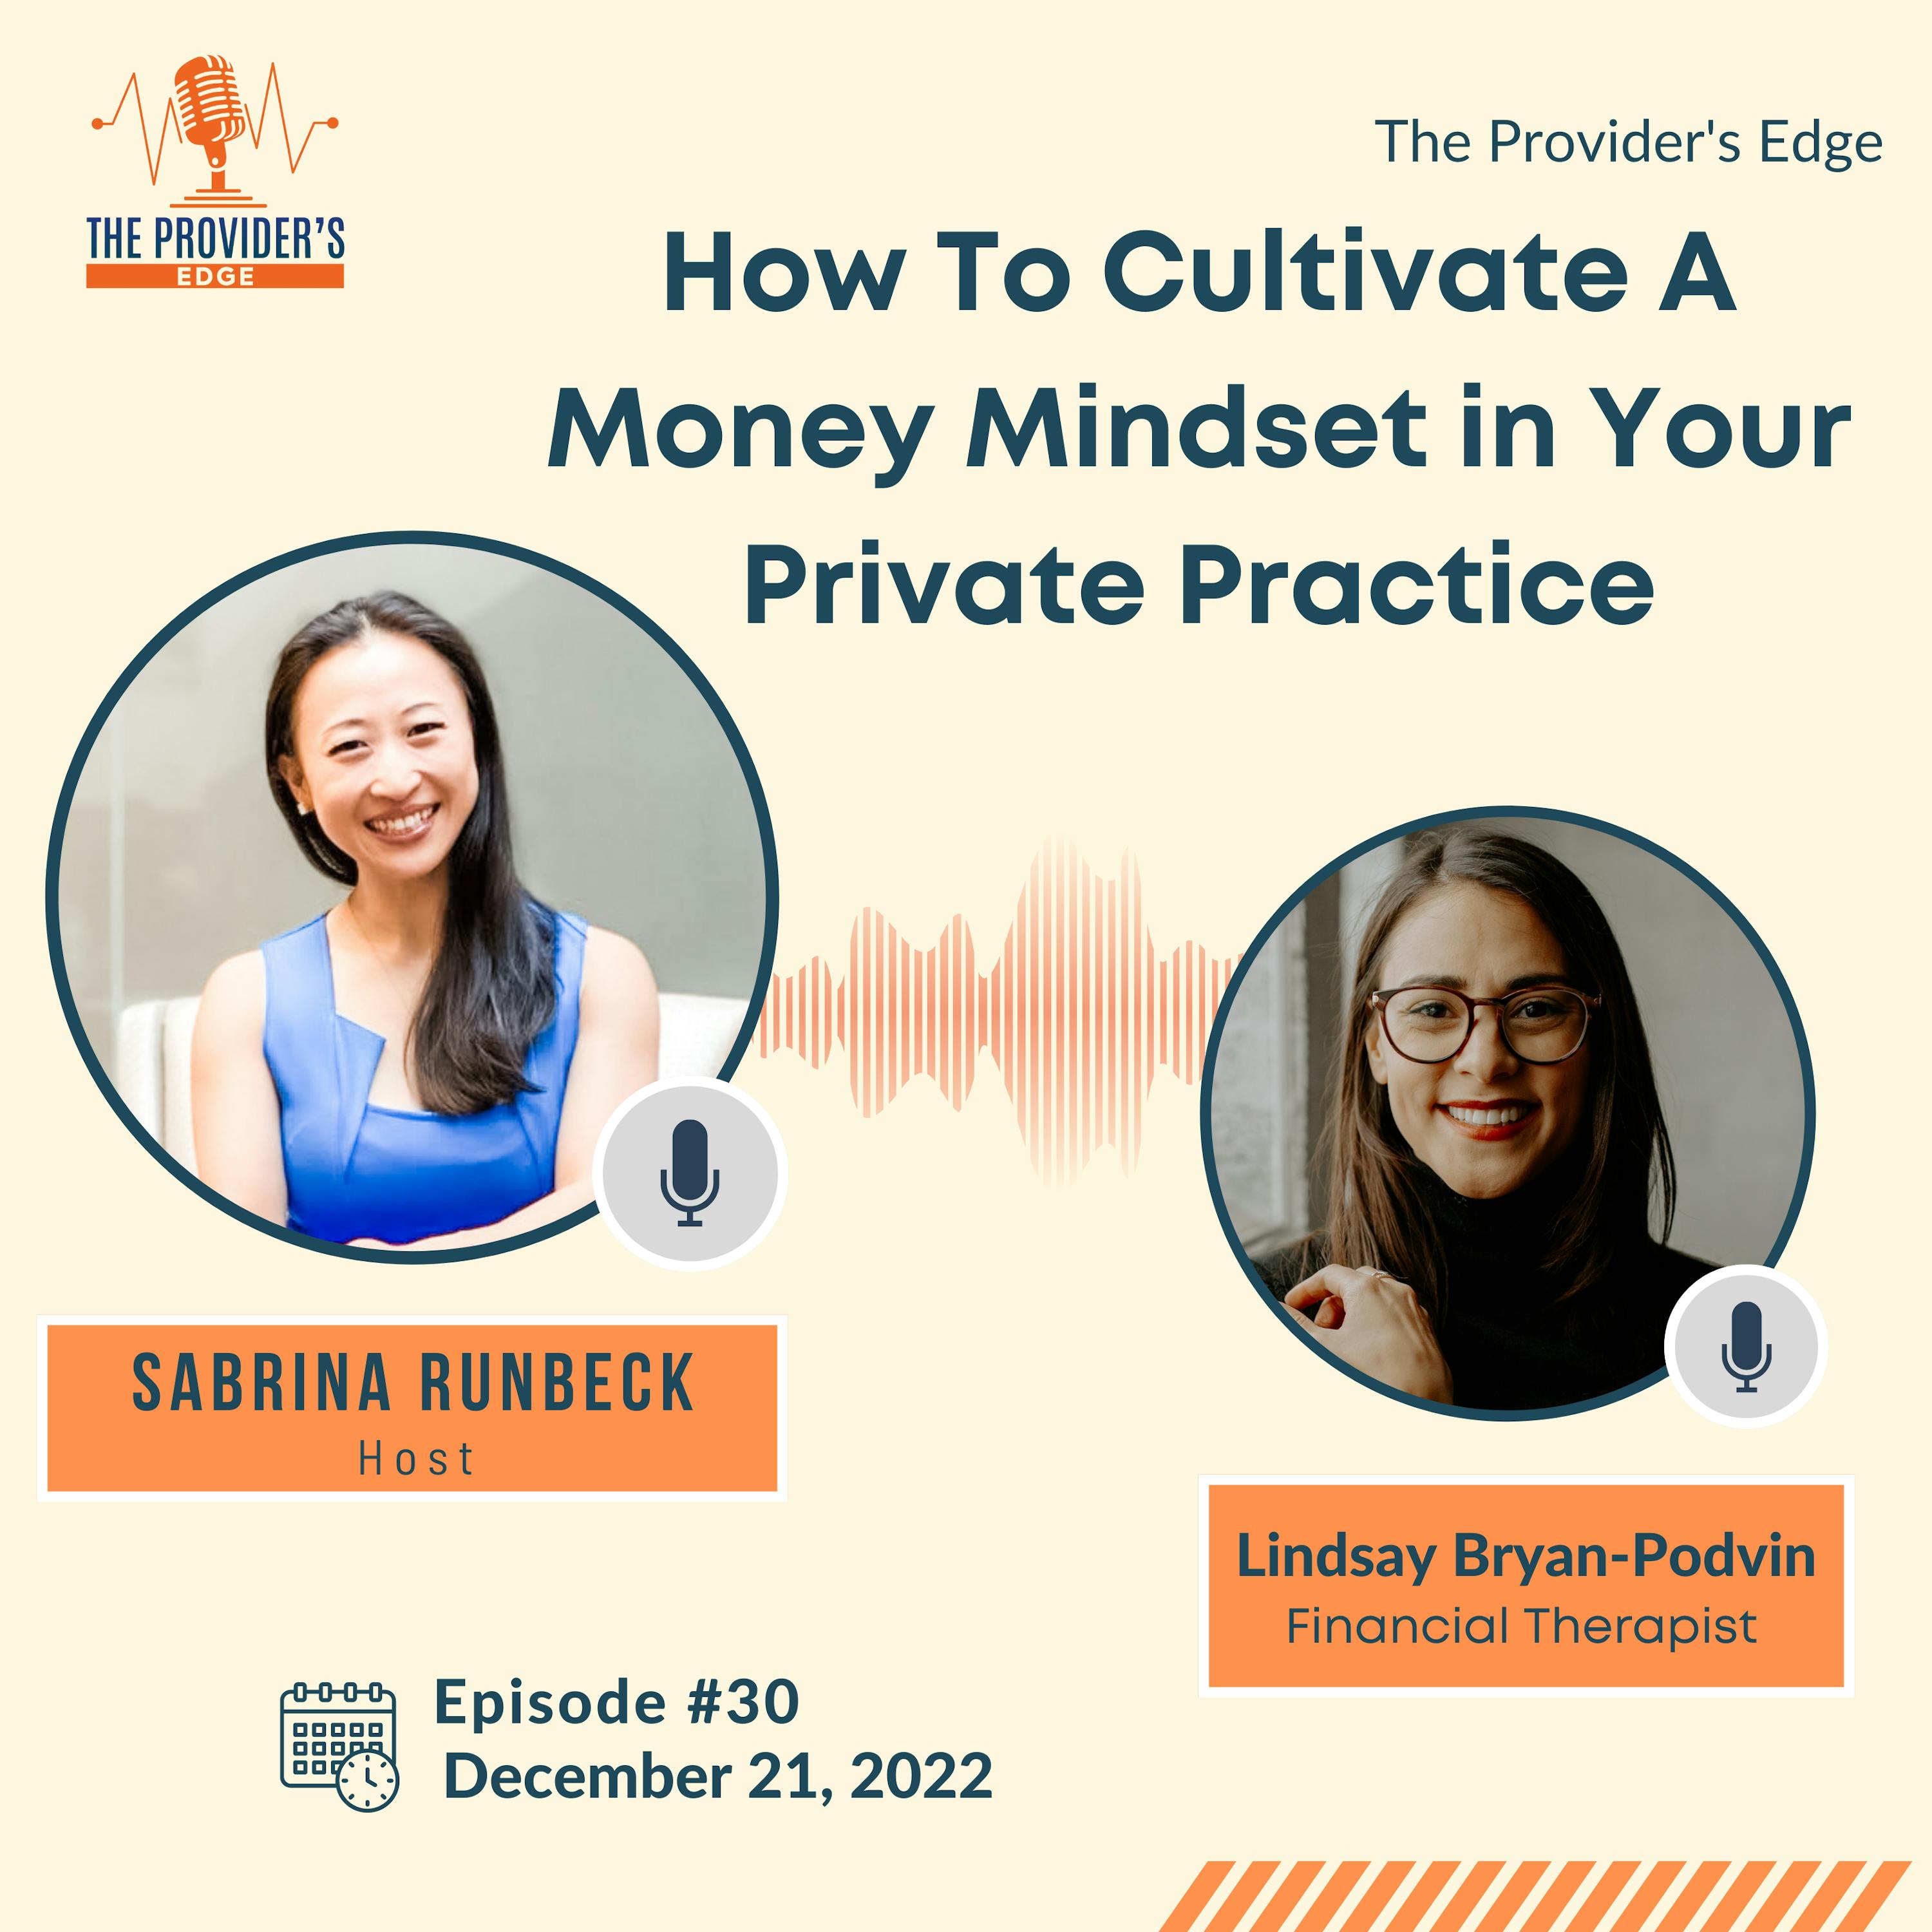 How To Cultivate A Money Mindset in Your Private Practice with Lindsay Bryan-Podvin Ep 30